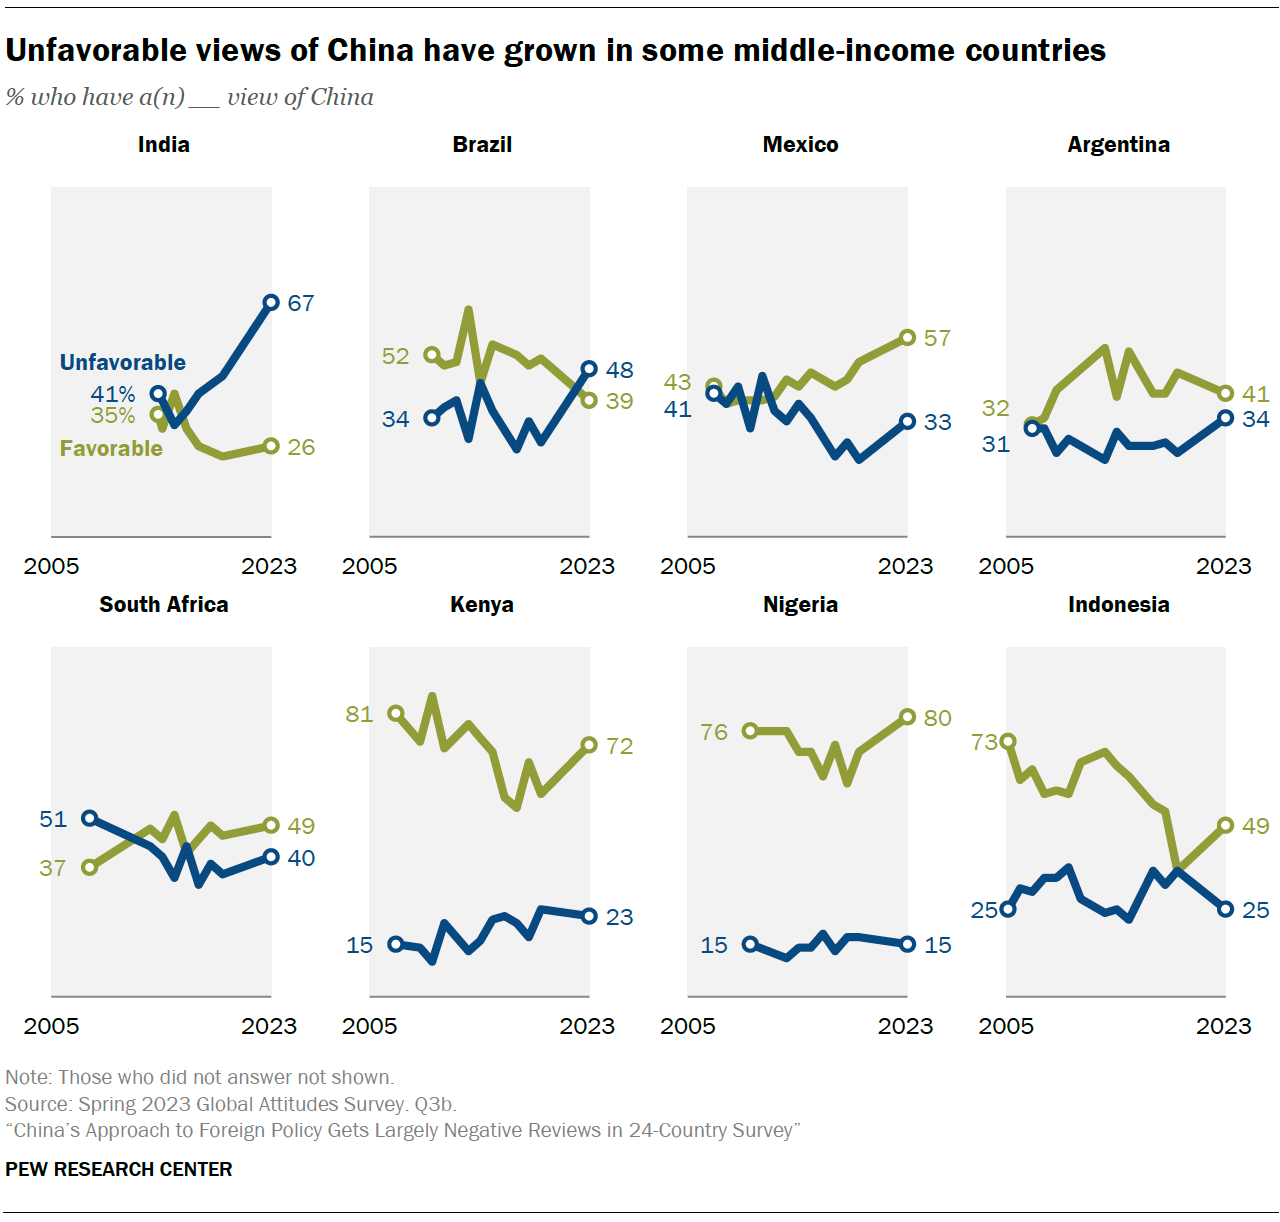 Unfavorable views of China have grown in some middle-income countries